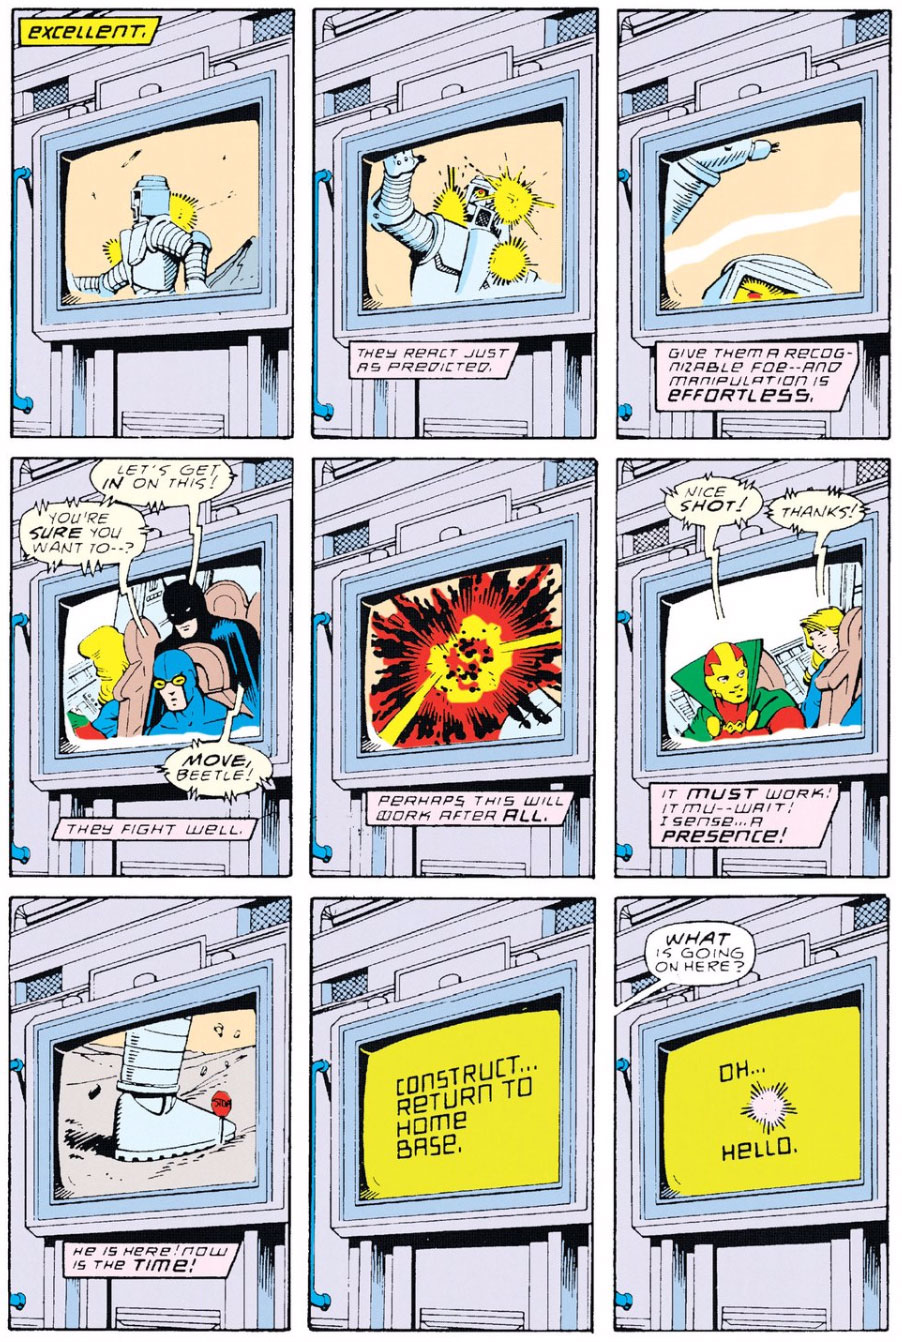 Justice League International #11 by Keith Giffen, JM DeMatteis, Kevin Maguire, and Al Gordon